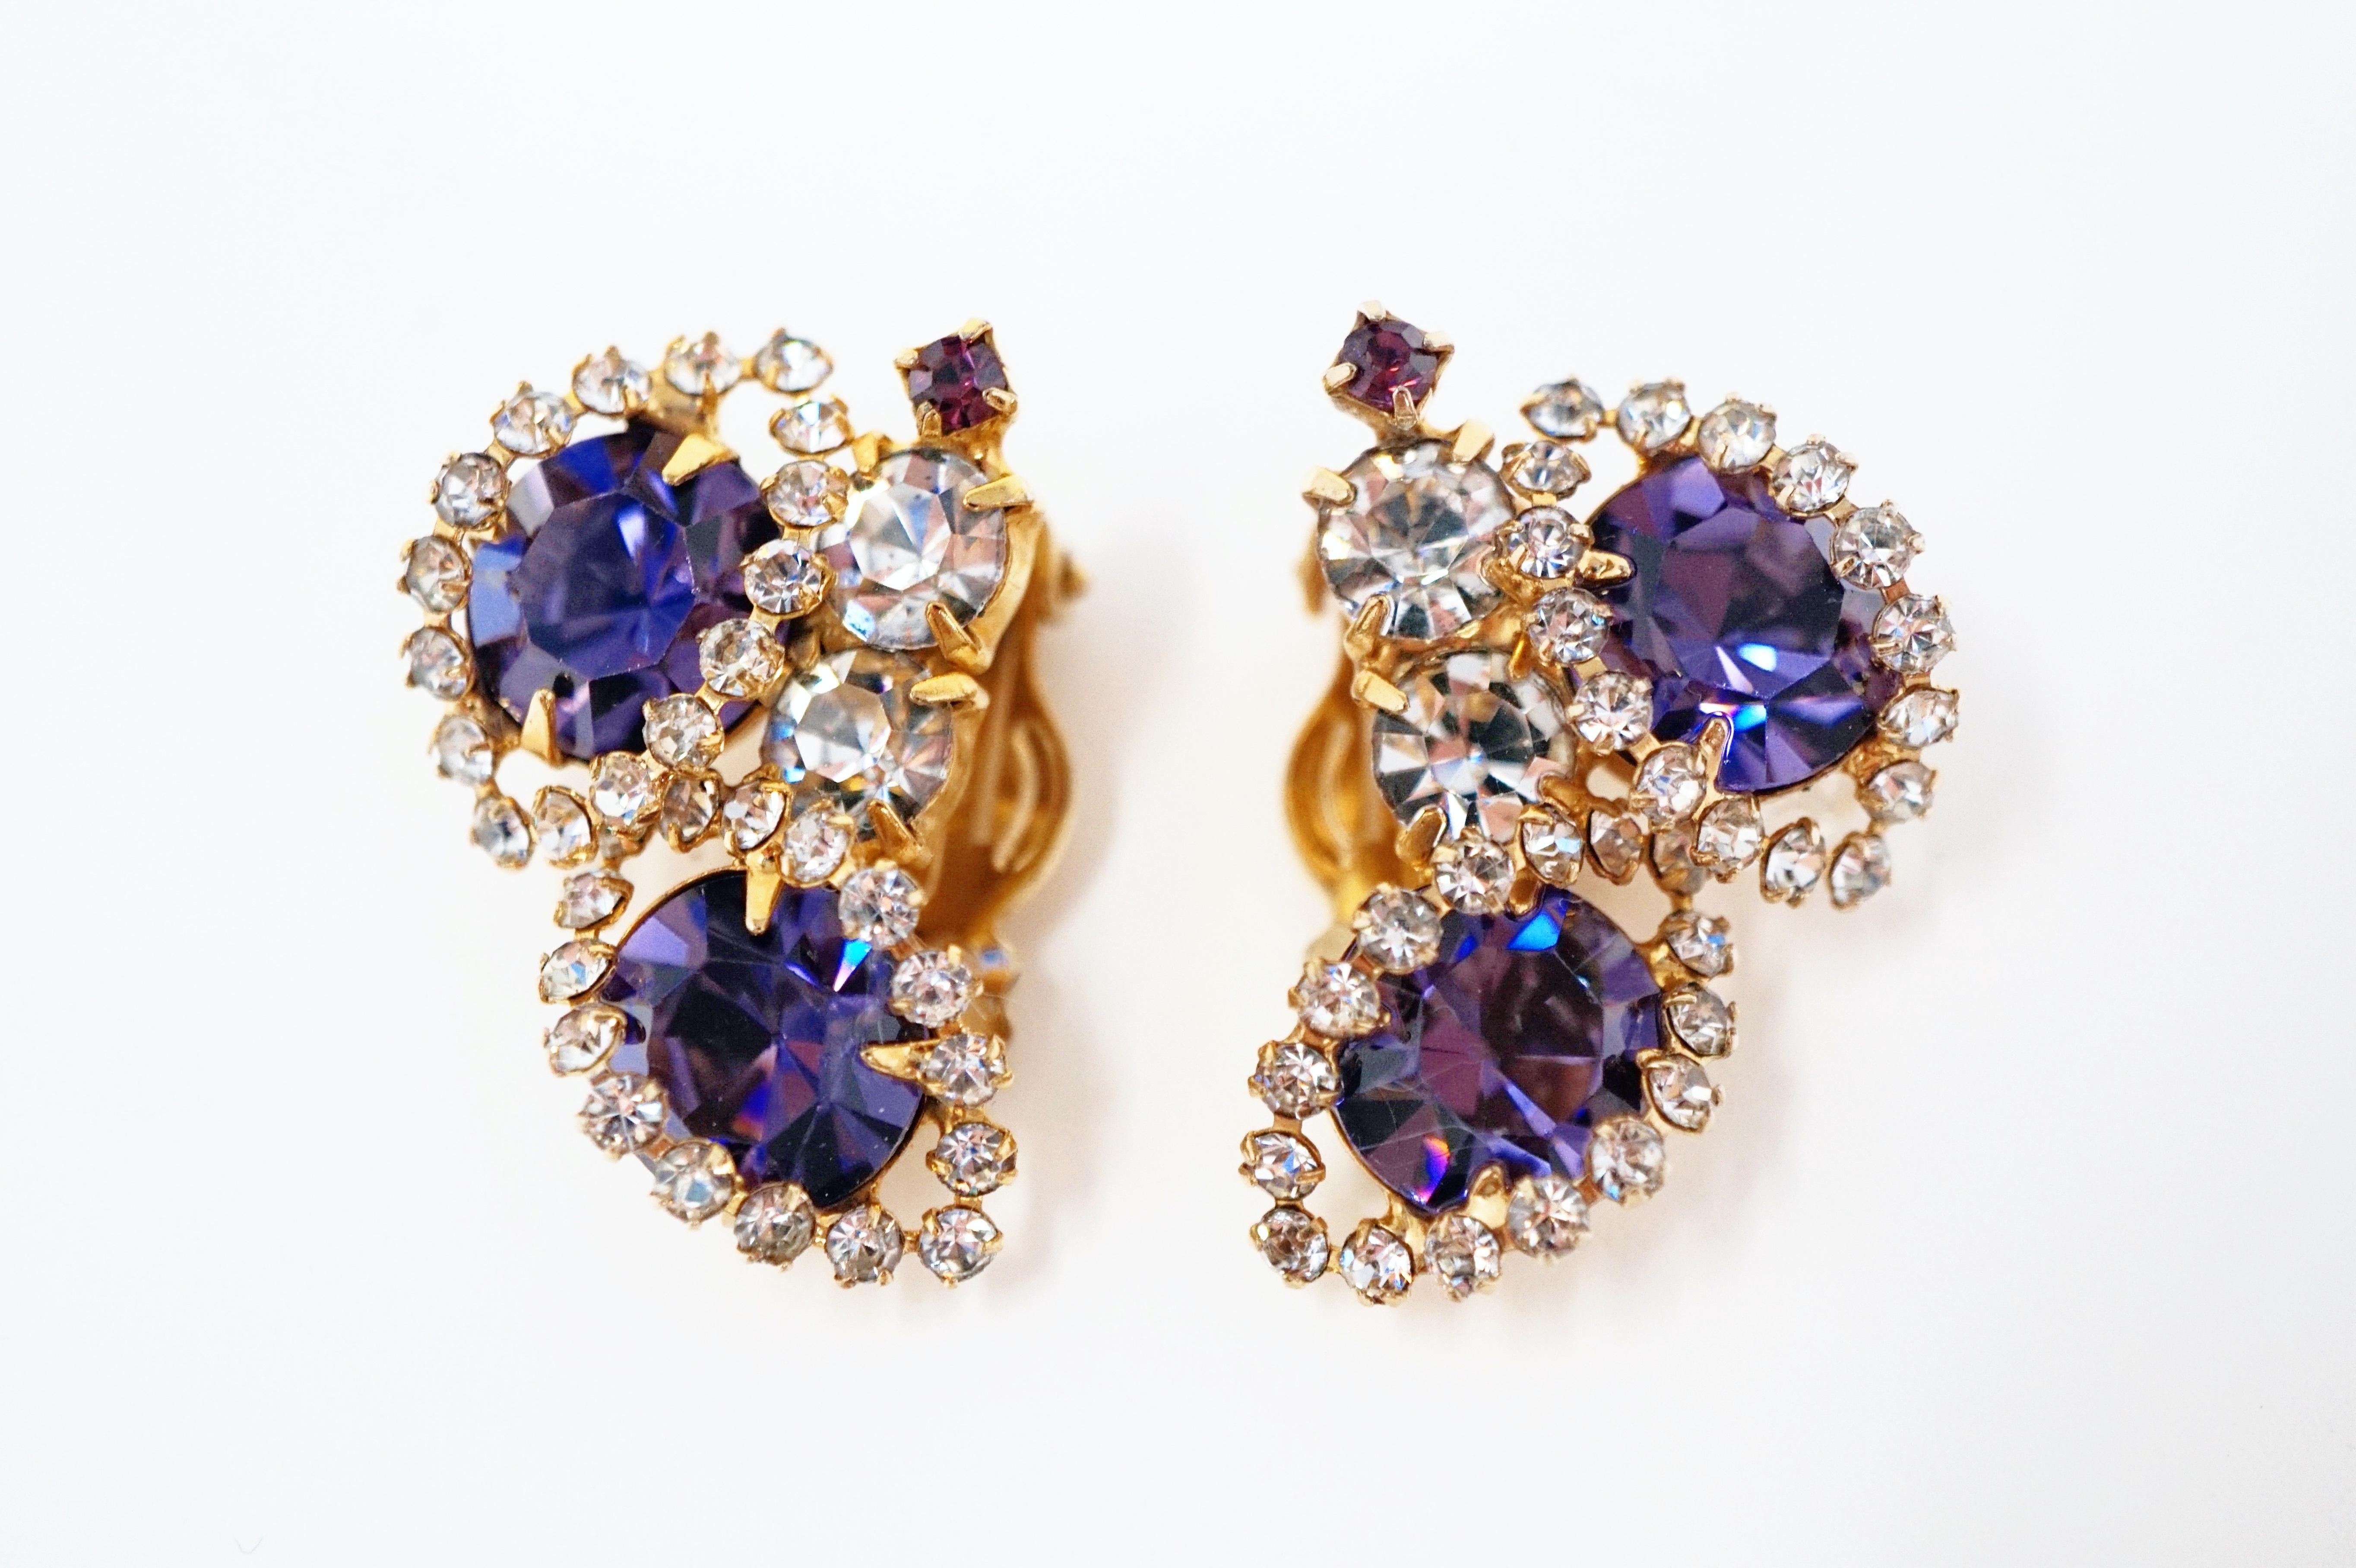 Absolutely gorgeous sparkling rhinestone earrings from the mid-century era, featuring faceted purple crystal rhinestones surrounded by clear crystal rhinestone pavé with gold tone hardware.

DETAILS:
- Clip-on earring backs
- Each earring measures